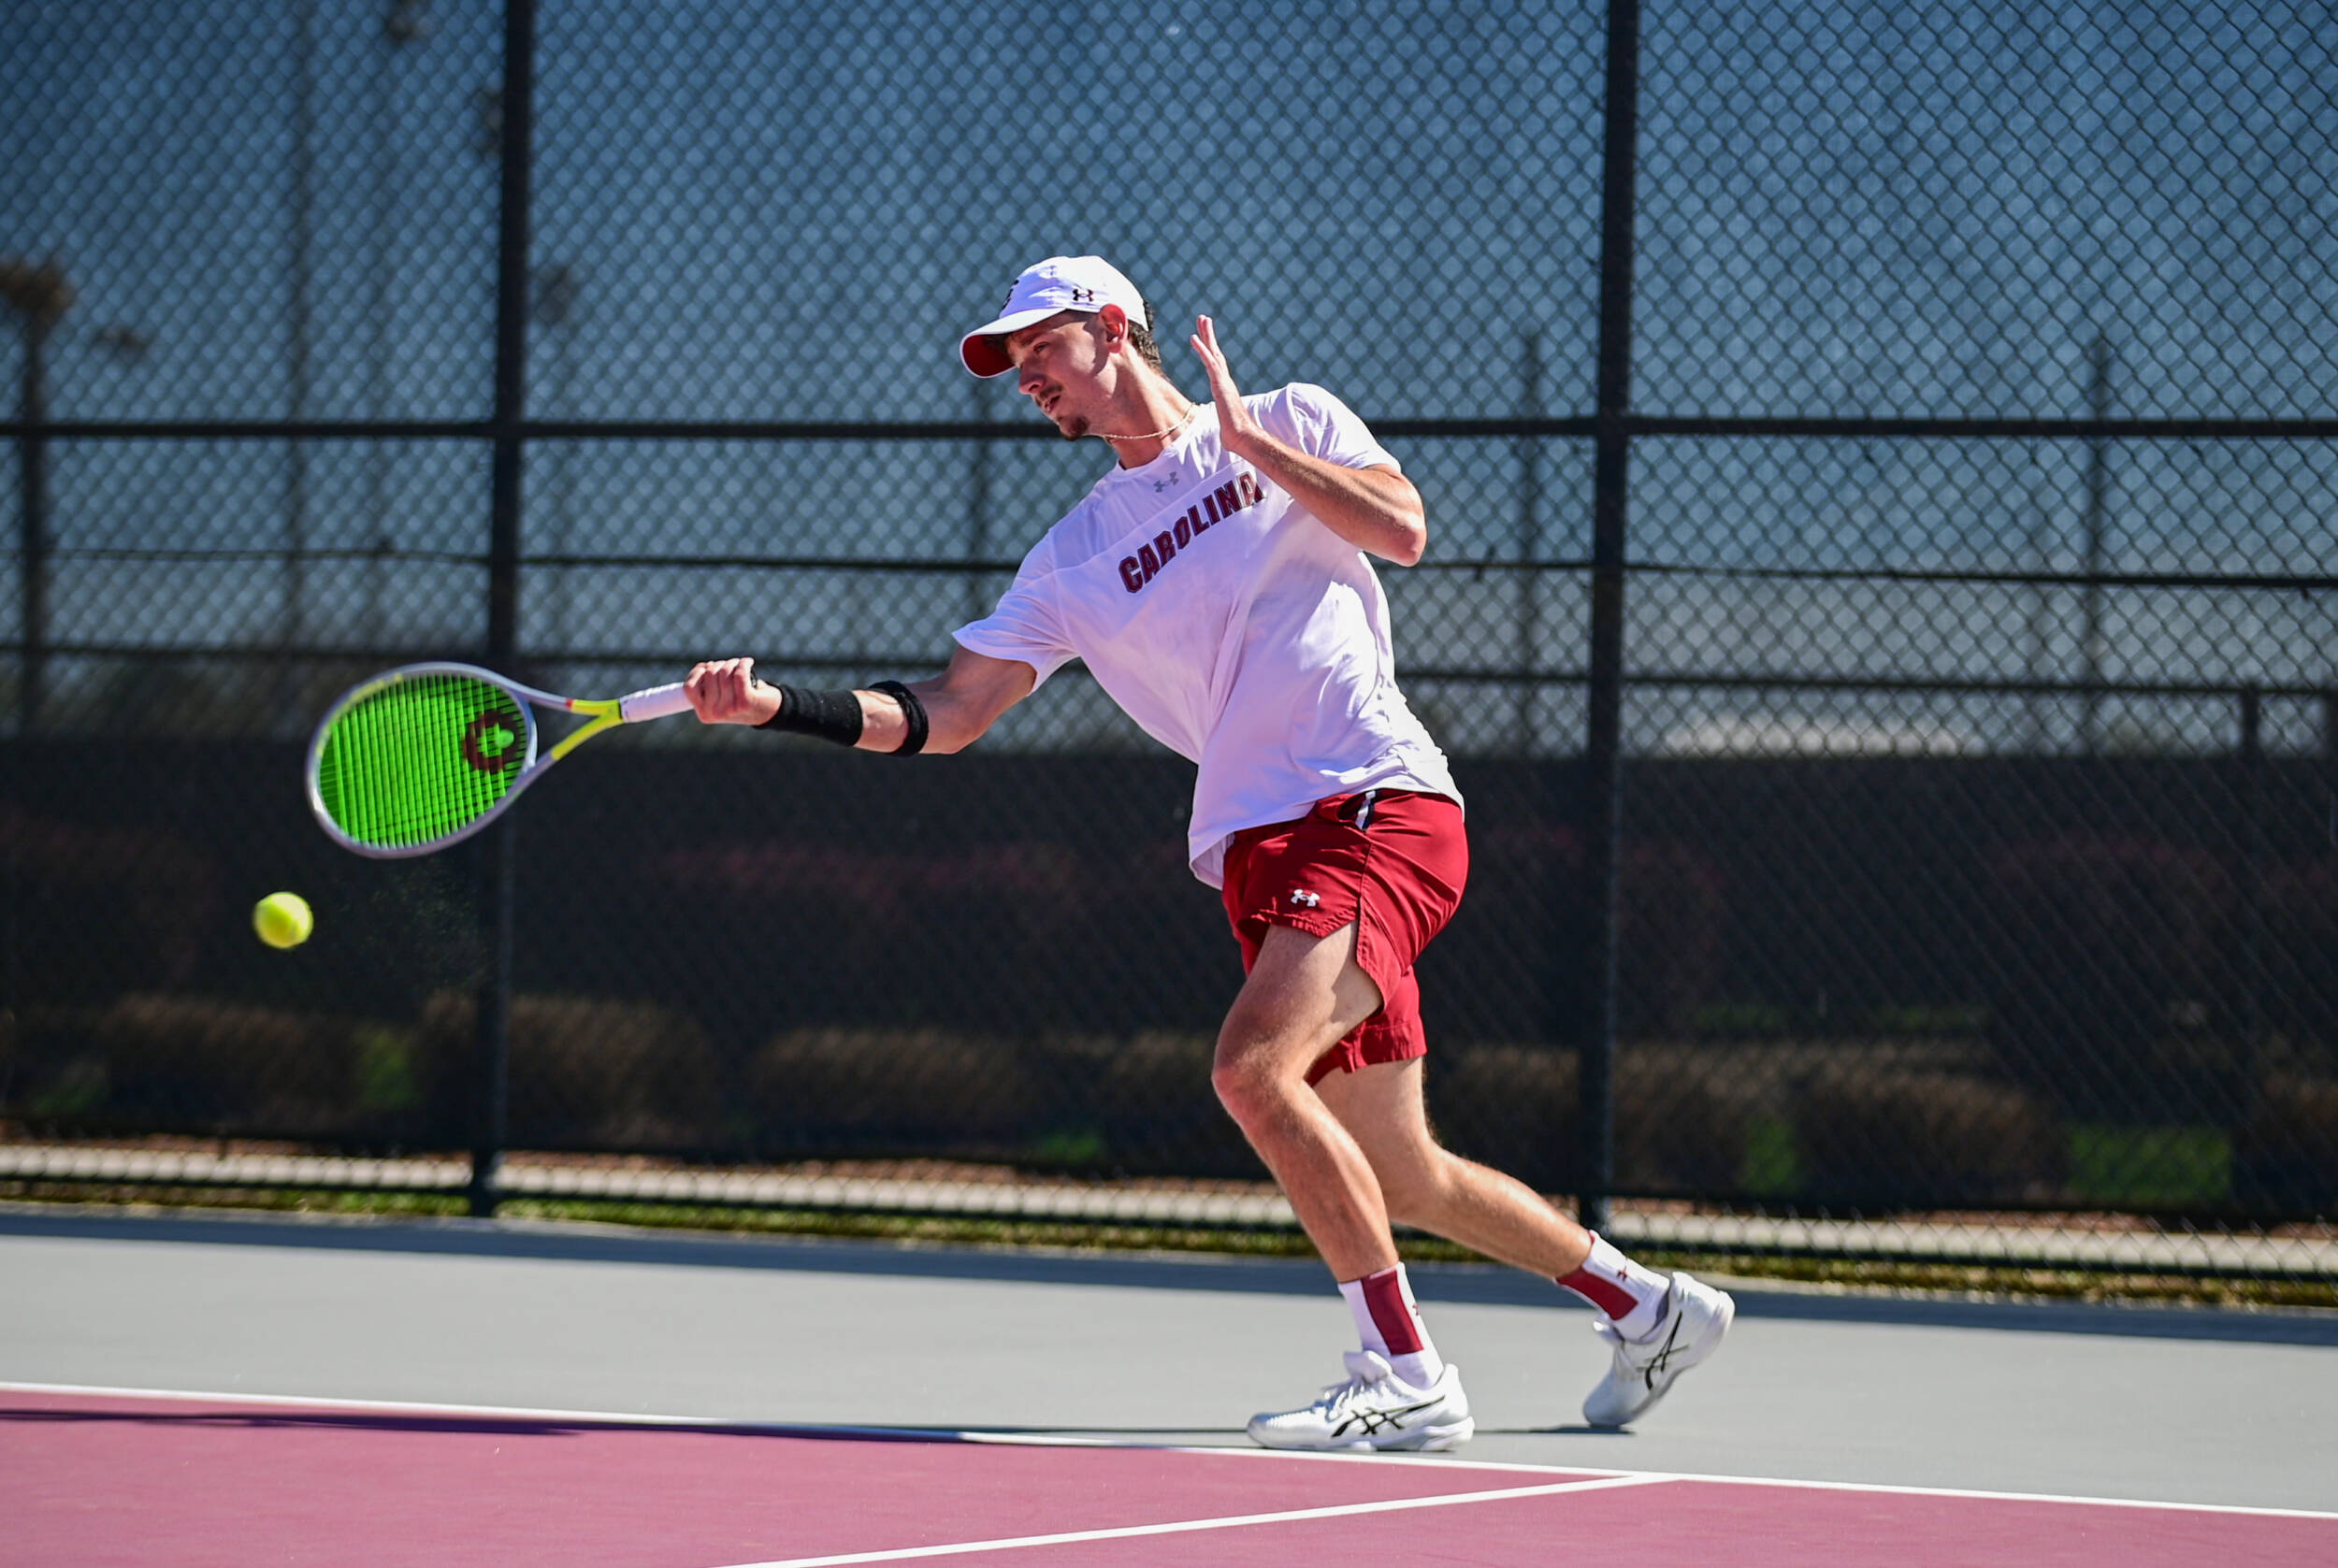 Men’s Tennis Continues Conference Play Against No. 66 Alabama